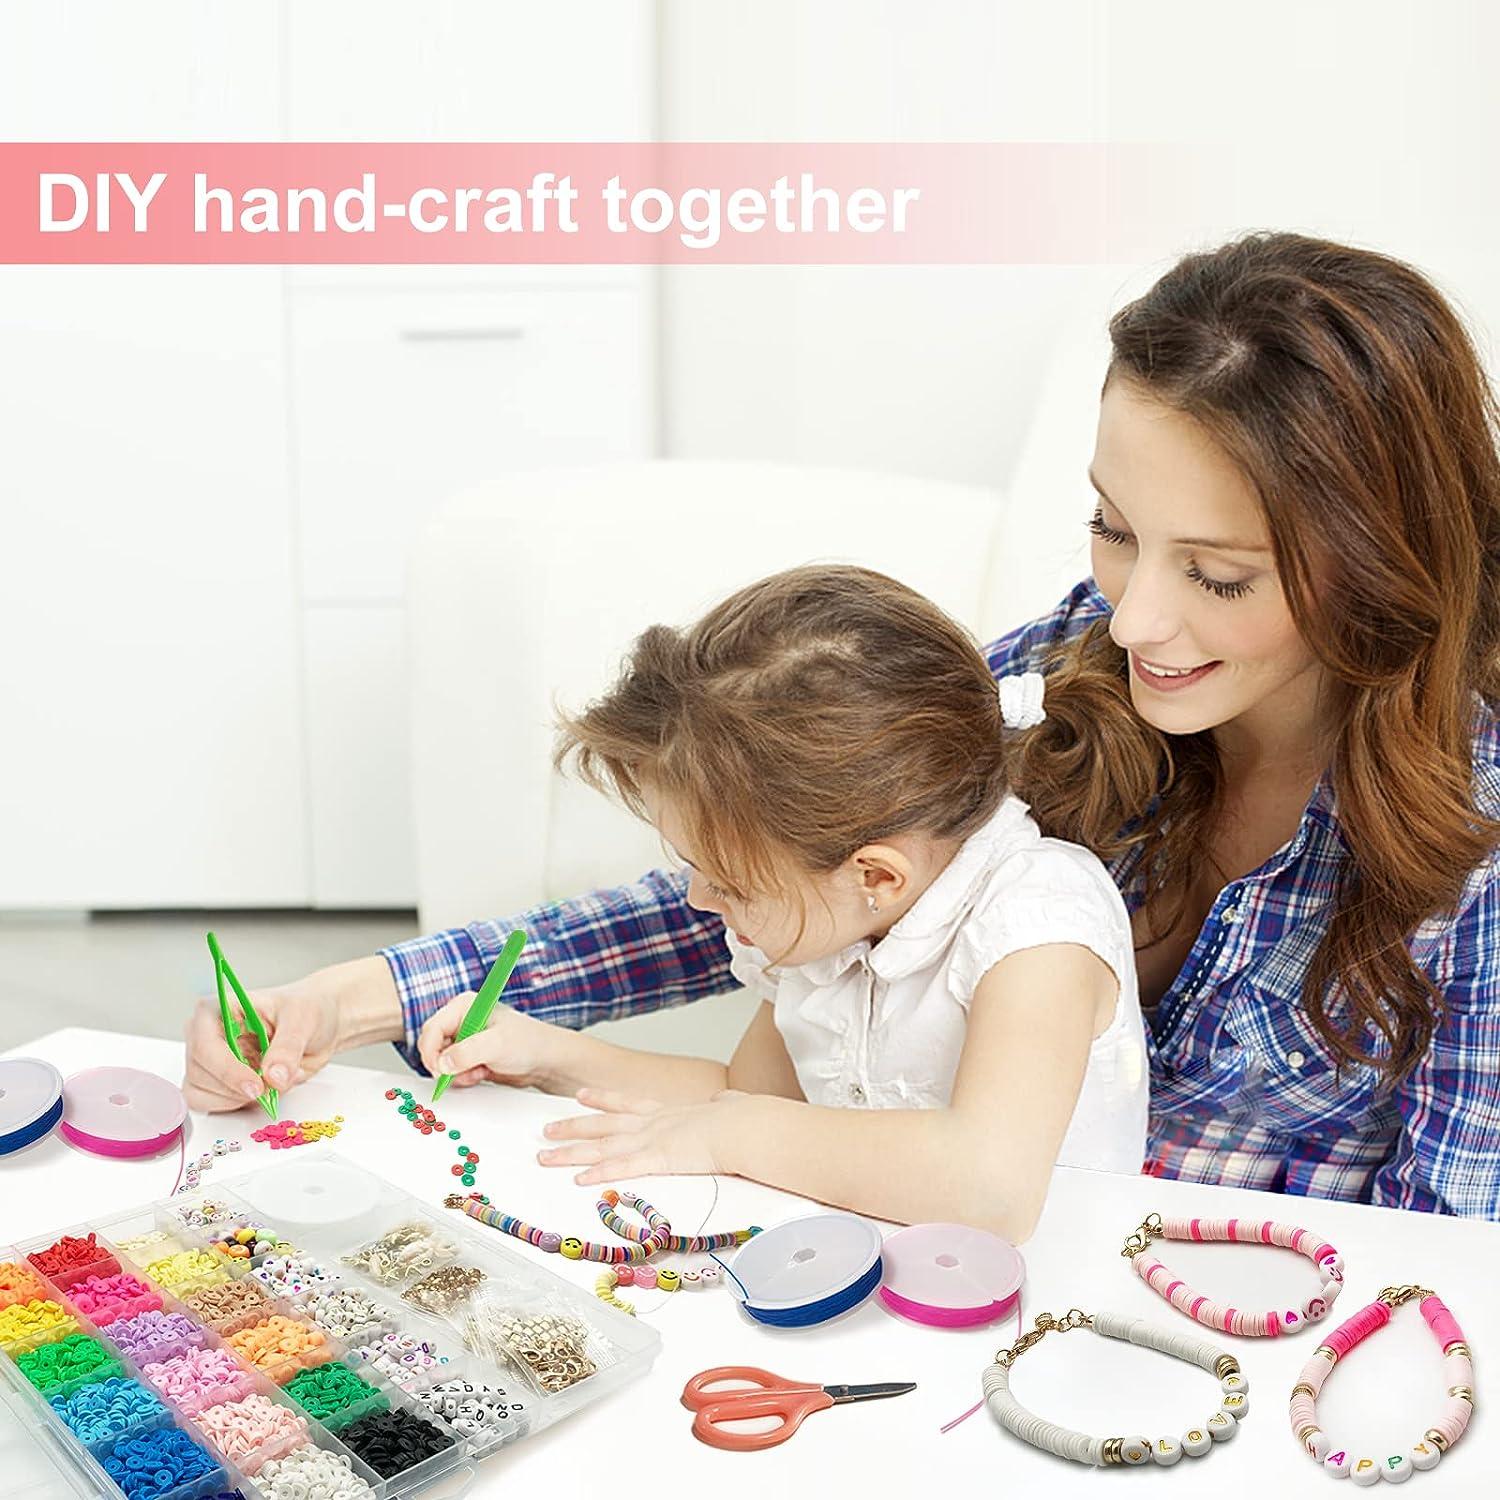 Jewelry Making Kit for Girls Arts and Crafts Gifts, Necklace Pendant and  Bracelet with 20 PCS Necklaces 4 Bracelets Jewelry Gift Set for Kids Girls  Teens Age 8-12 